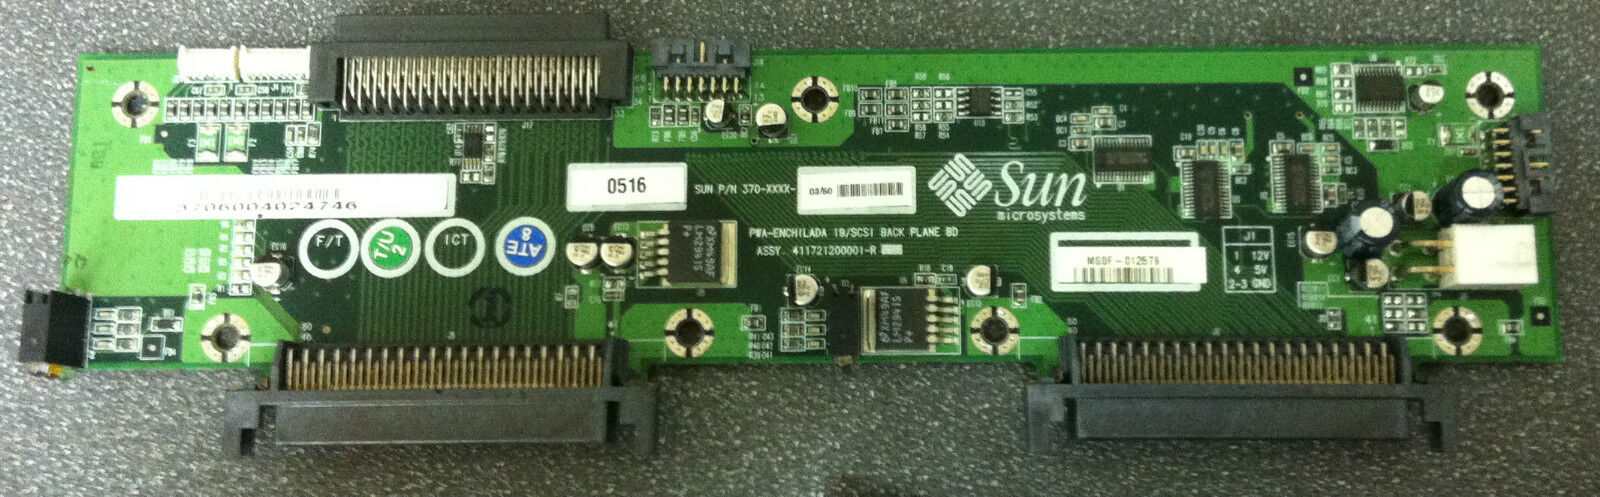 4x Sun 370-6004 SCSI Interface Boards Assembly for Netra 240 